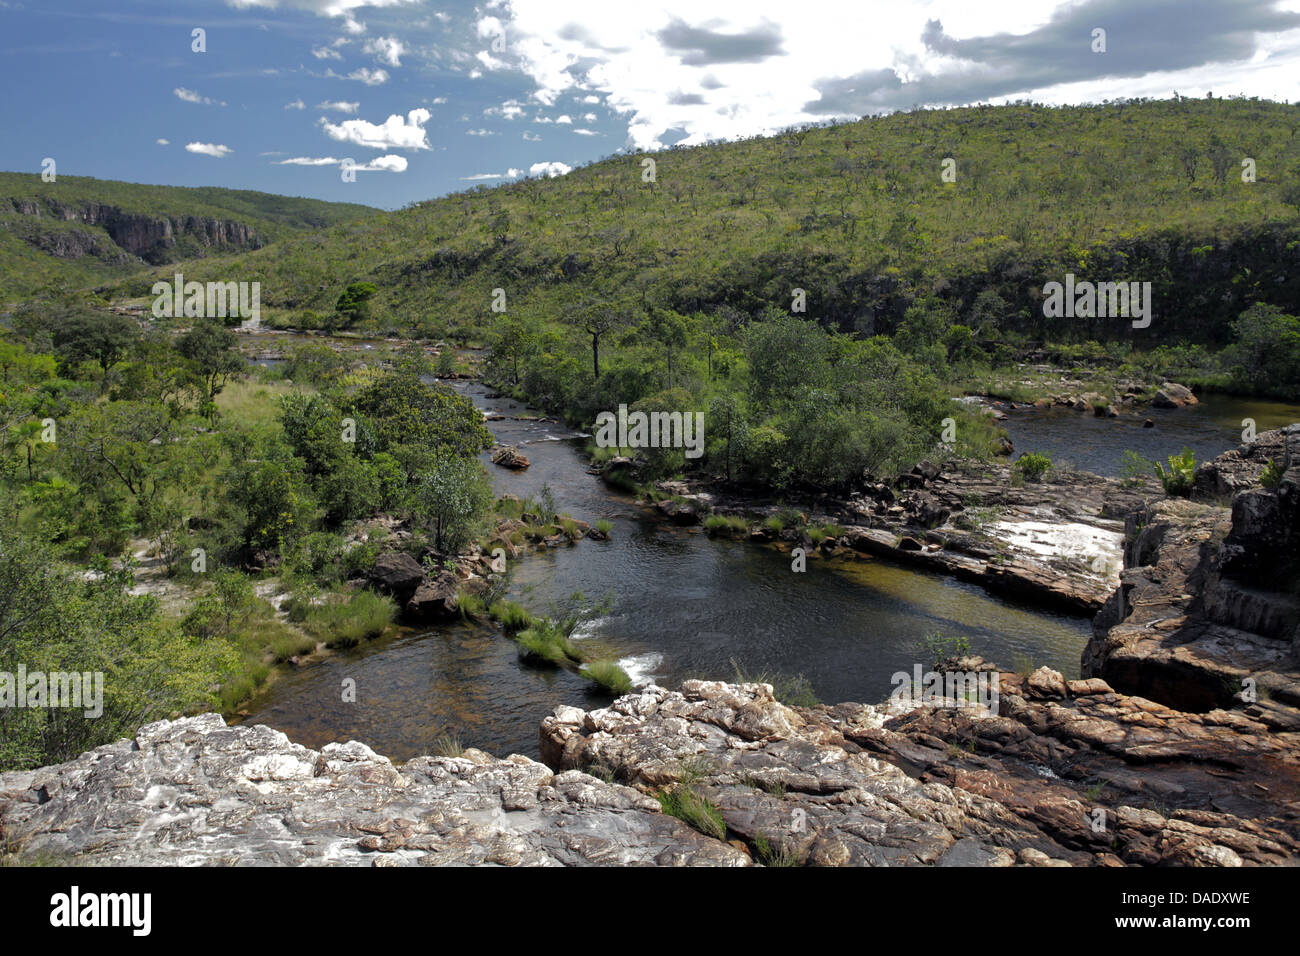 River of Couros rock formation and landscape Chapada dos Veadeiros Goias State, central Brazil Stock Photo